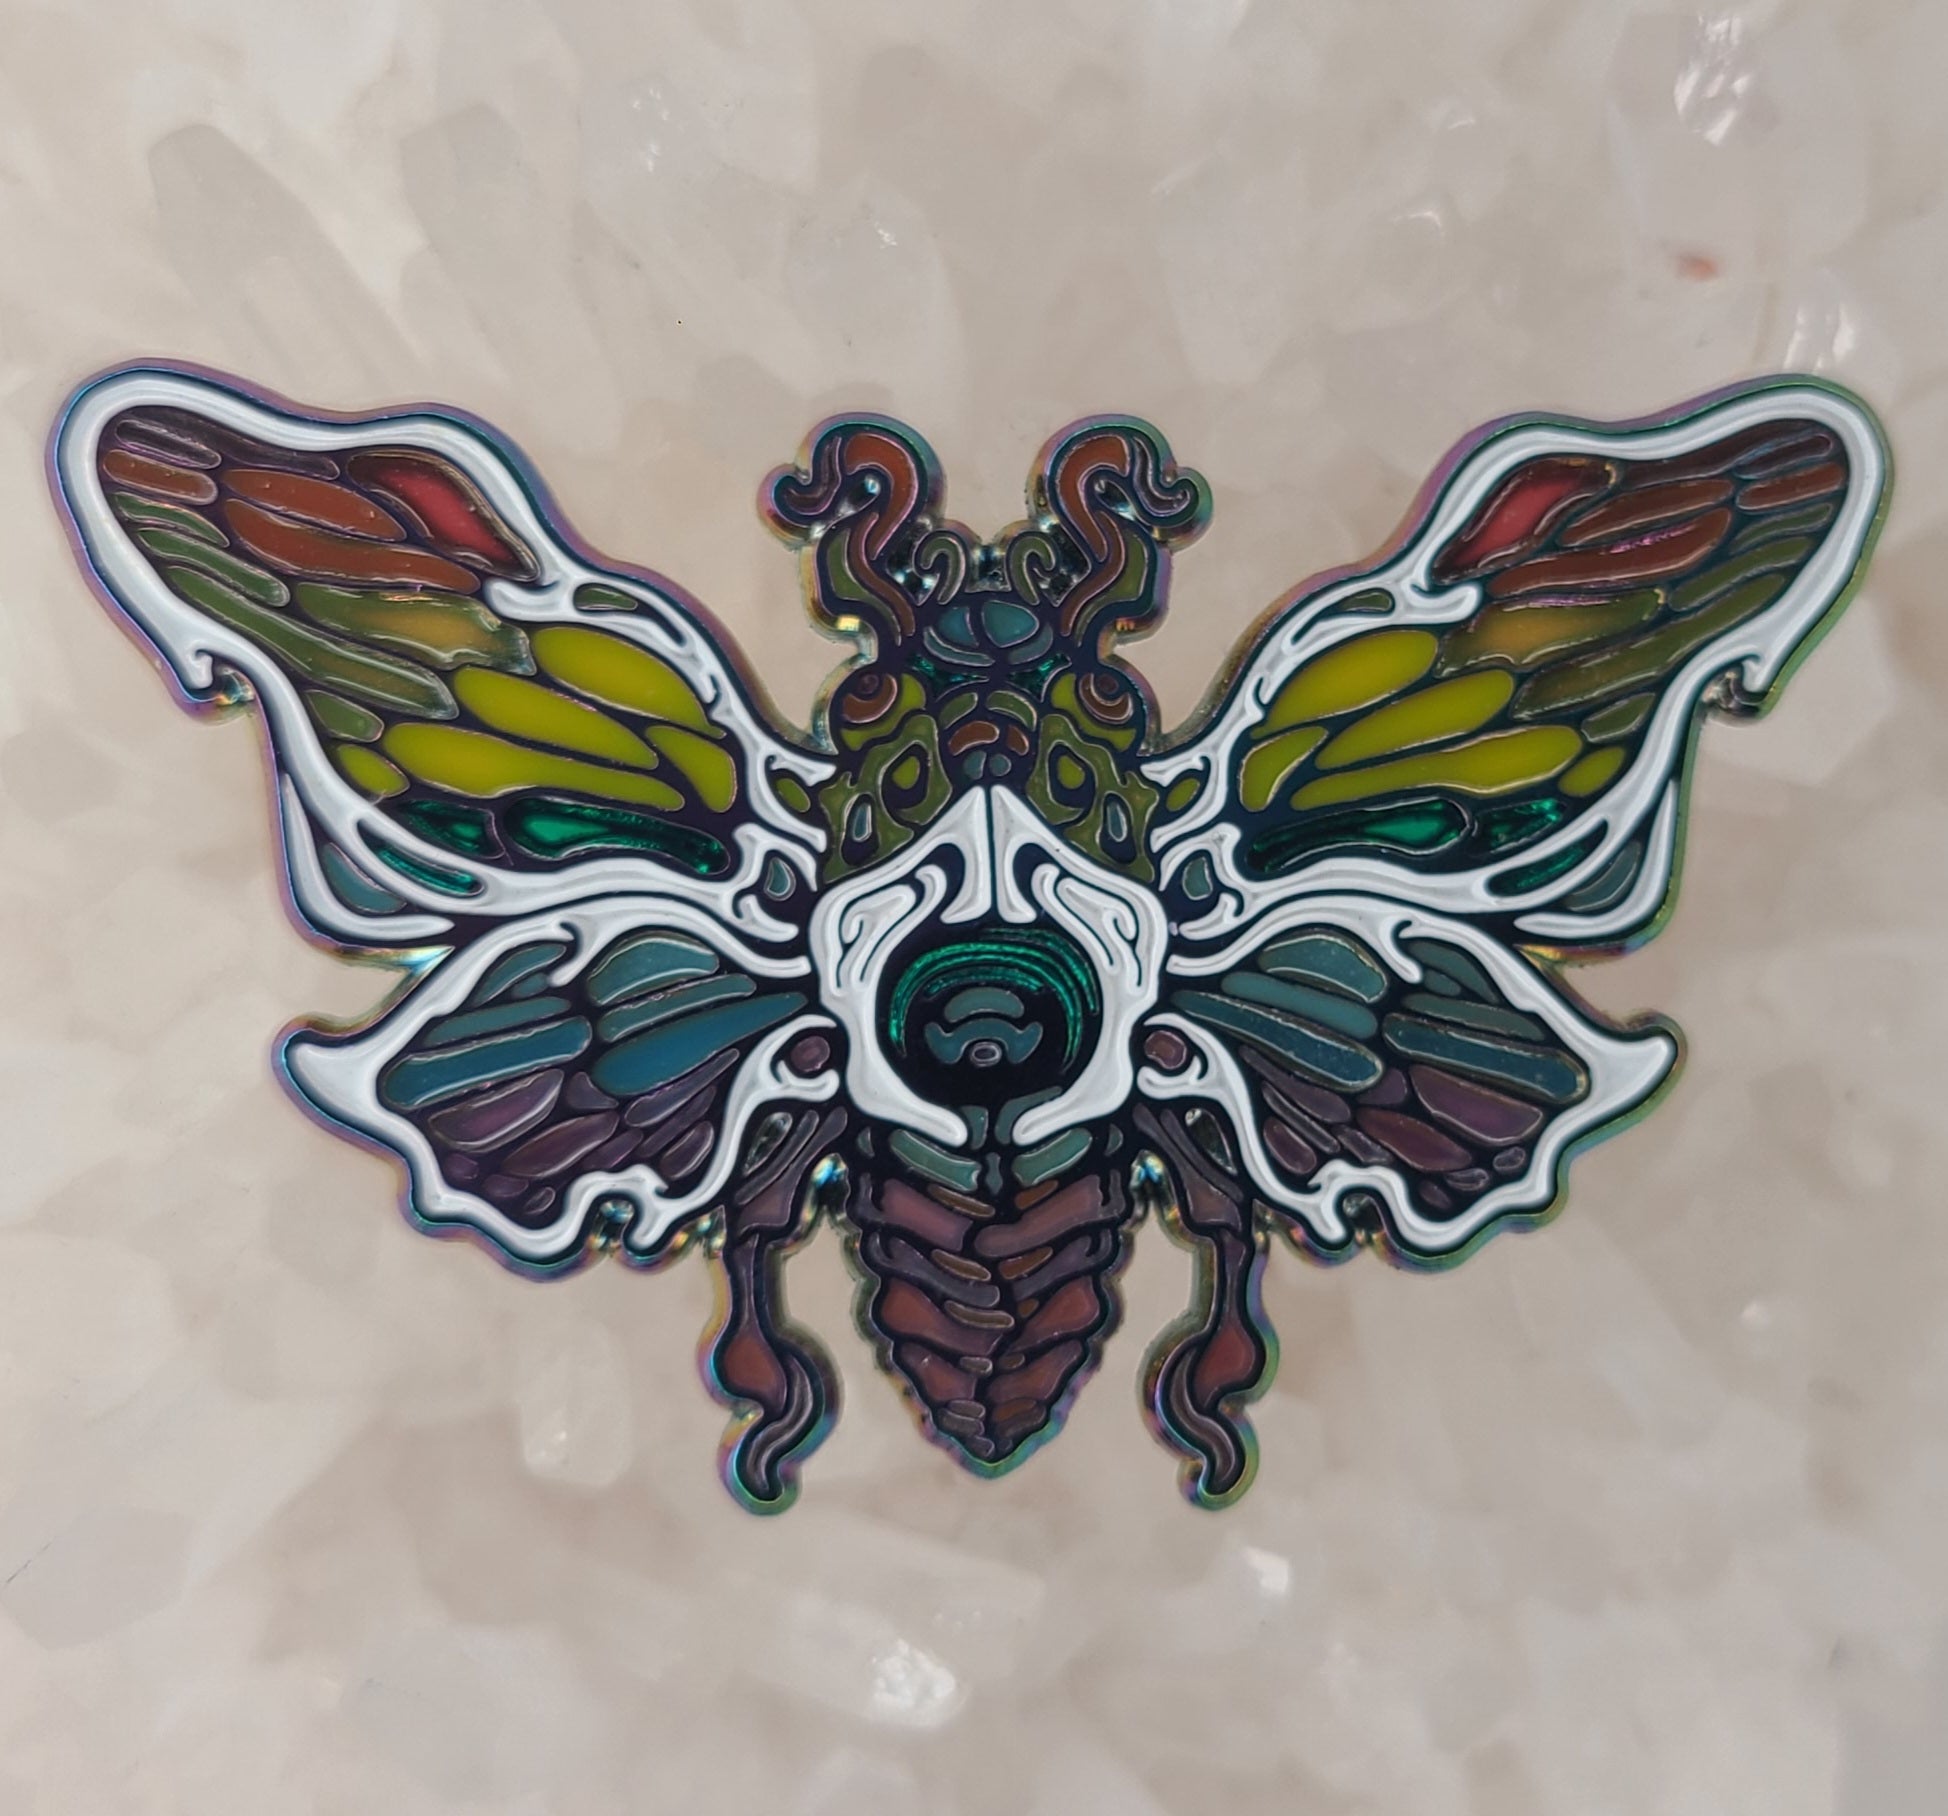 Jade Cicada Stained Glass Butterfly Moth White Edm Dj Music Enamel Pins Hat Pins Lapel Pin Brooch Badge Festival Pin